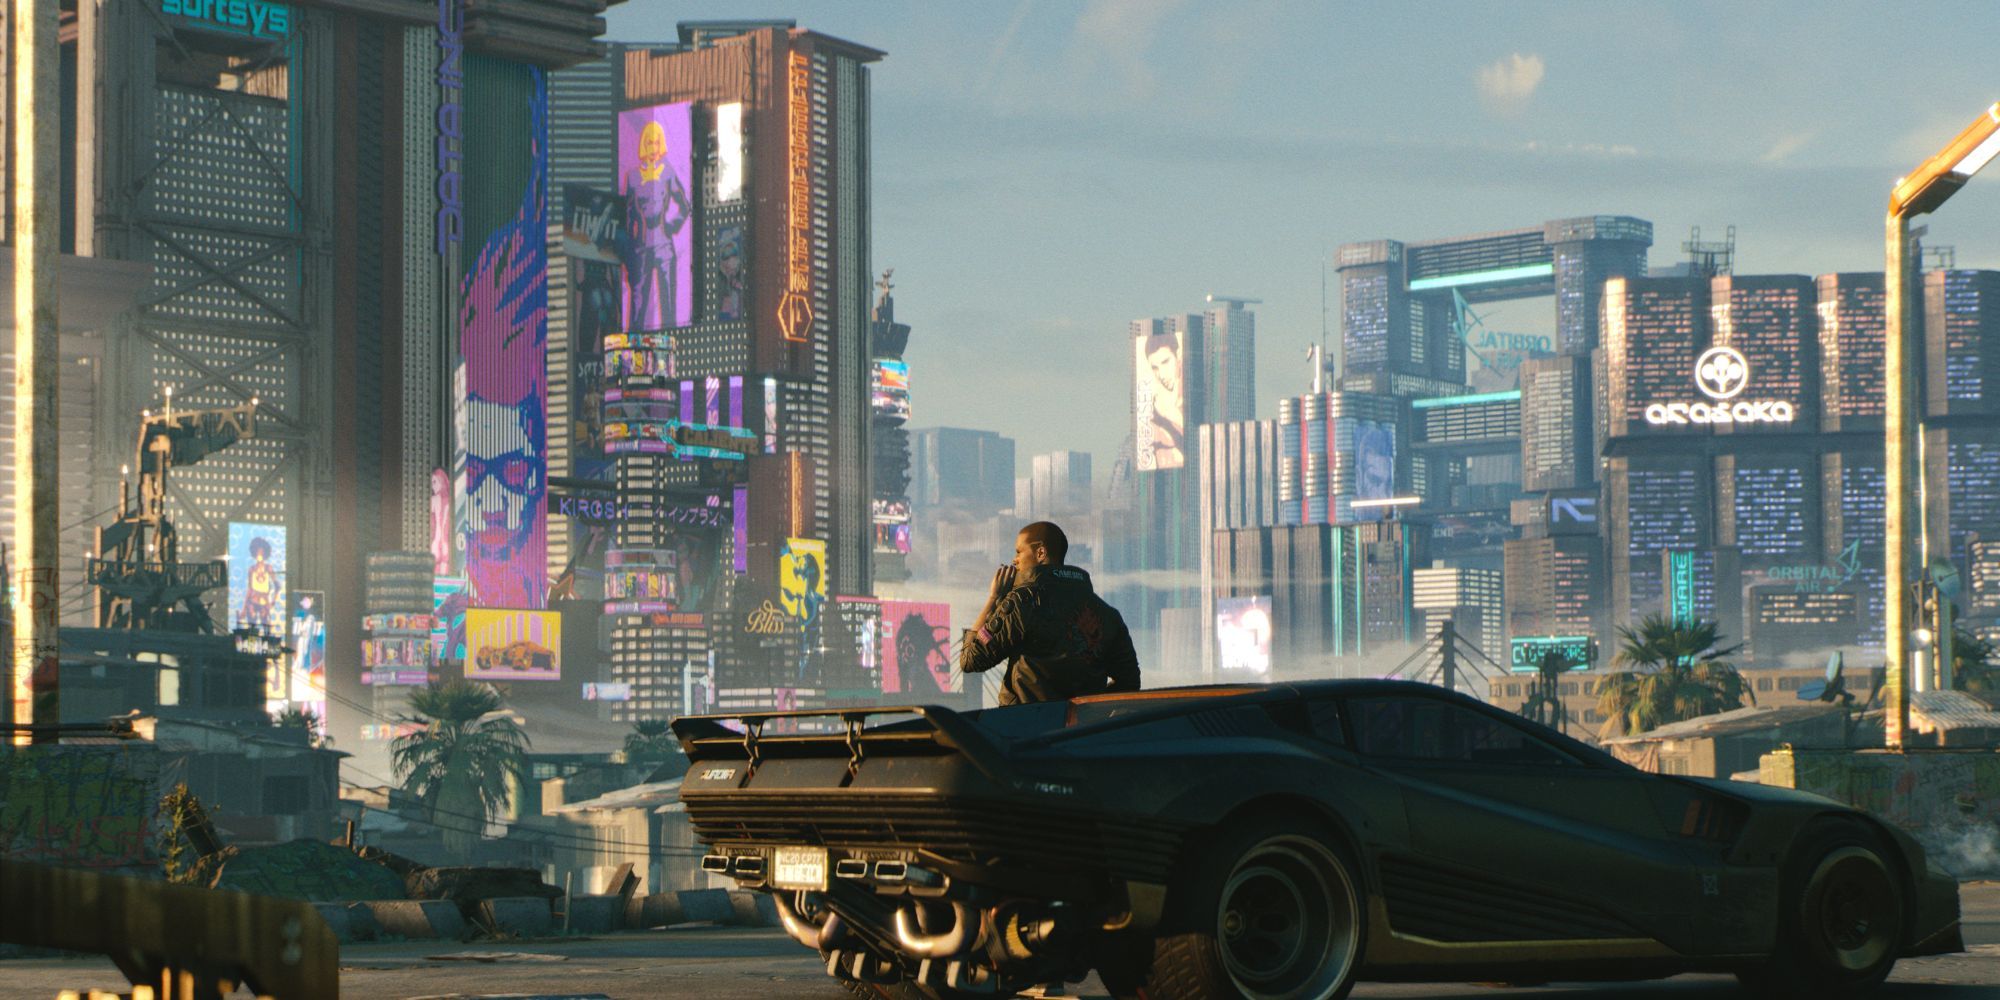 player in foreground with vehicle parked, in front of a view of Night City's towering buildings